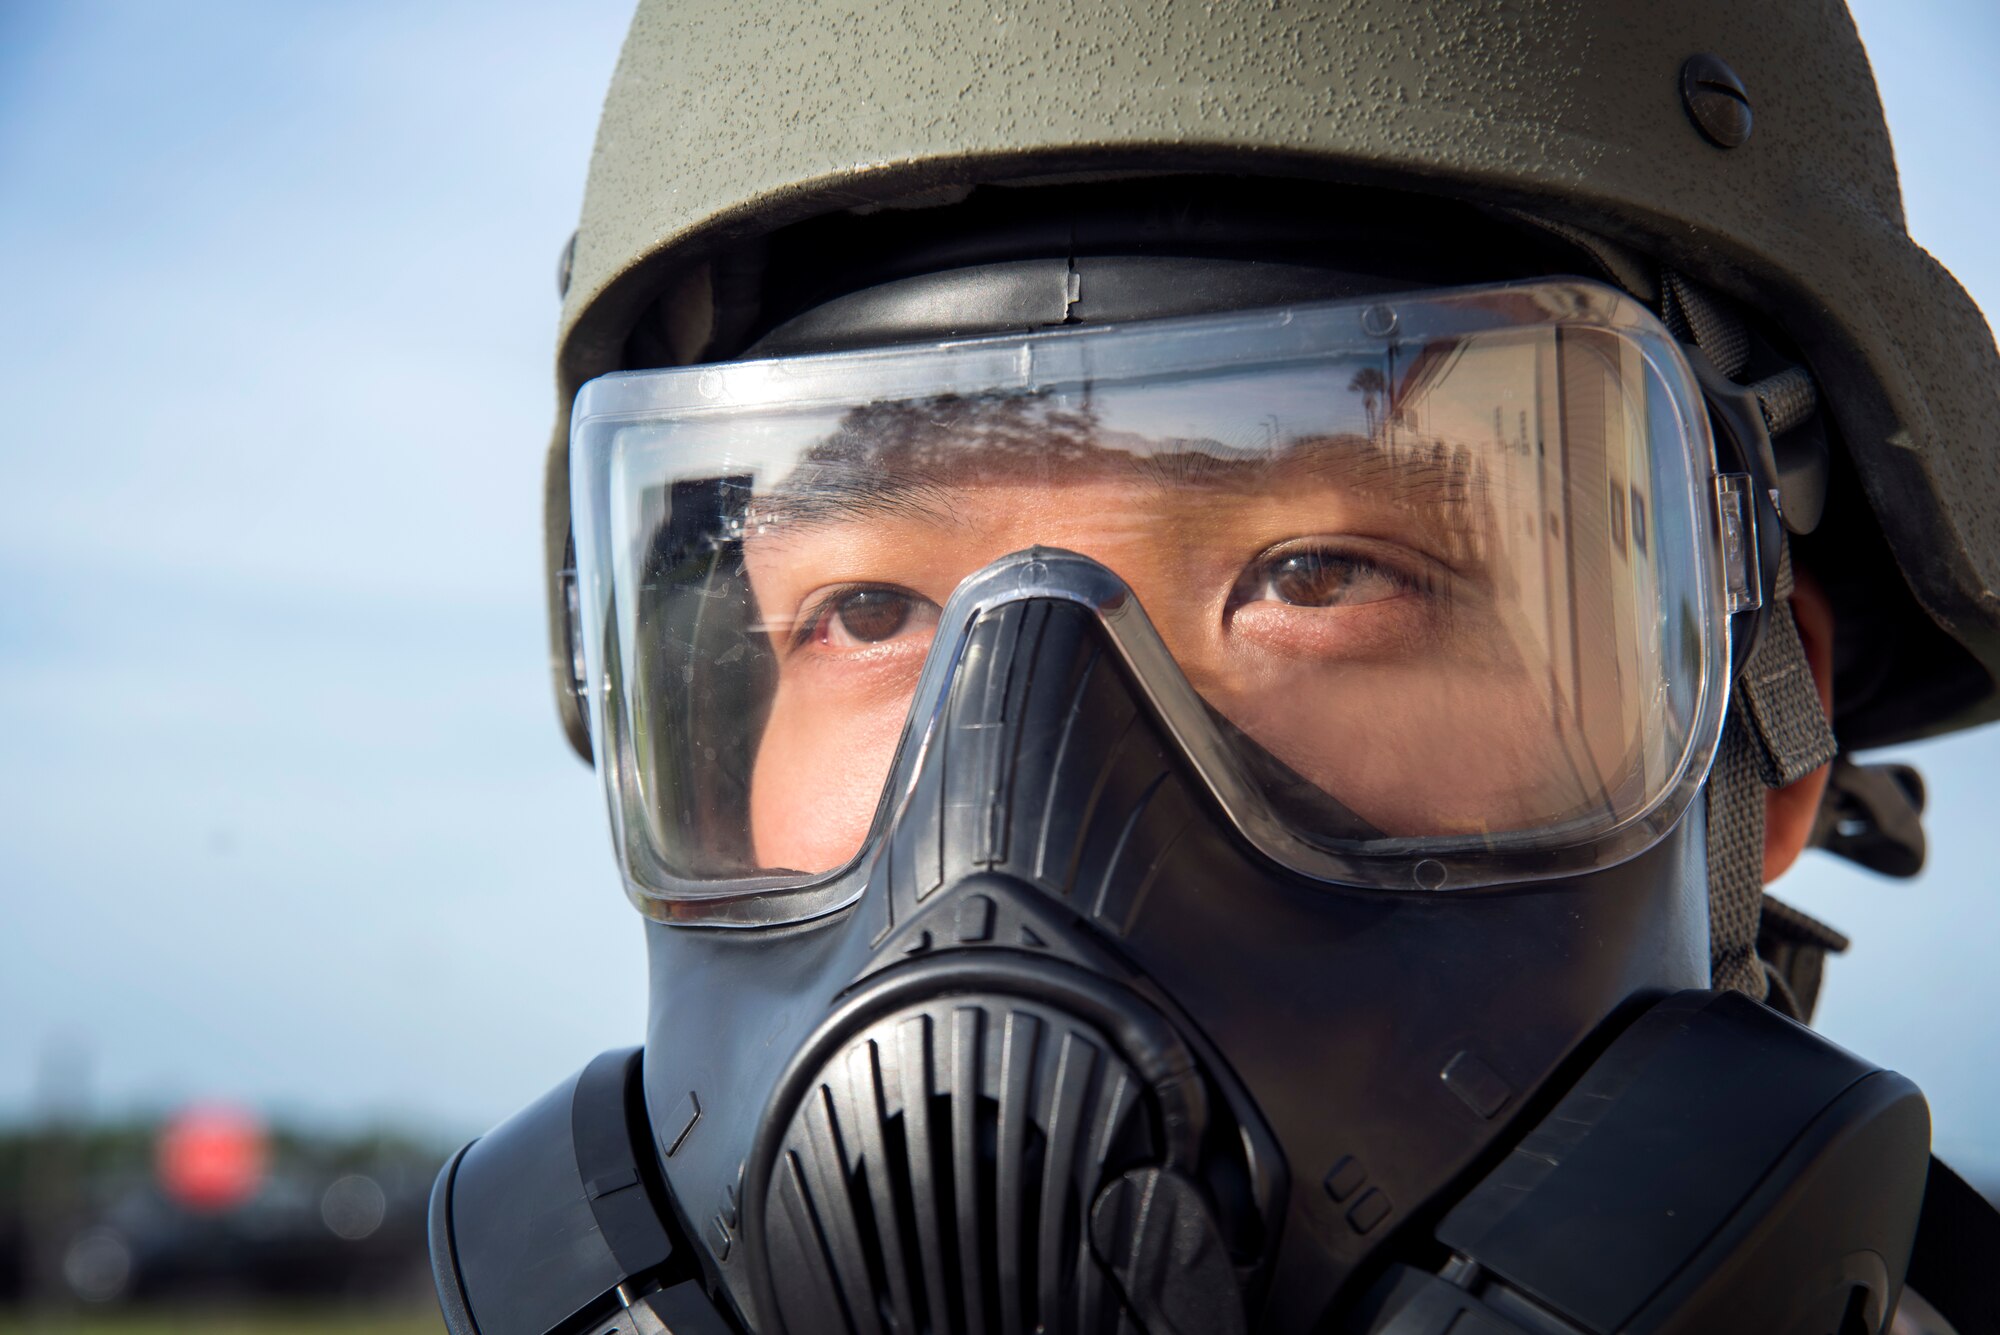 U.S. Air Force Staff Sgt. Frank Sanaxay, a vehicle operator assigned to the 927th Logistic Readiness Squadron, wears a mission-oriented protective posture (MOPP) gas mask and helmet after a MOPP gear fitting at MacDill Air Force Base, Fla., Oct. 2, 2018.